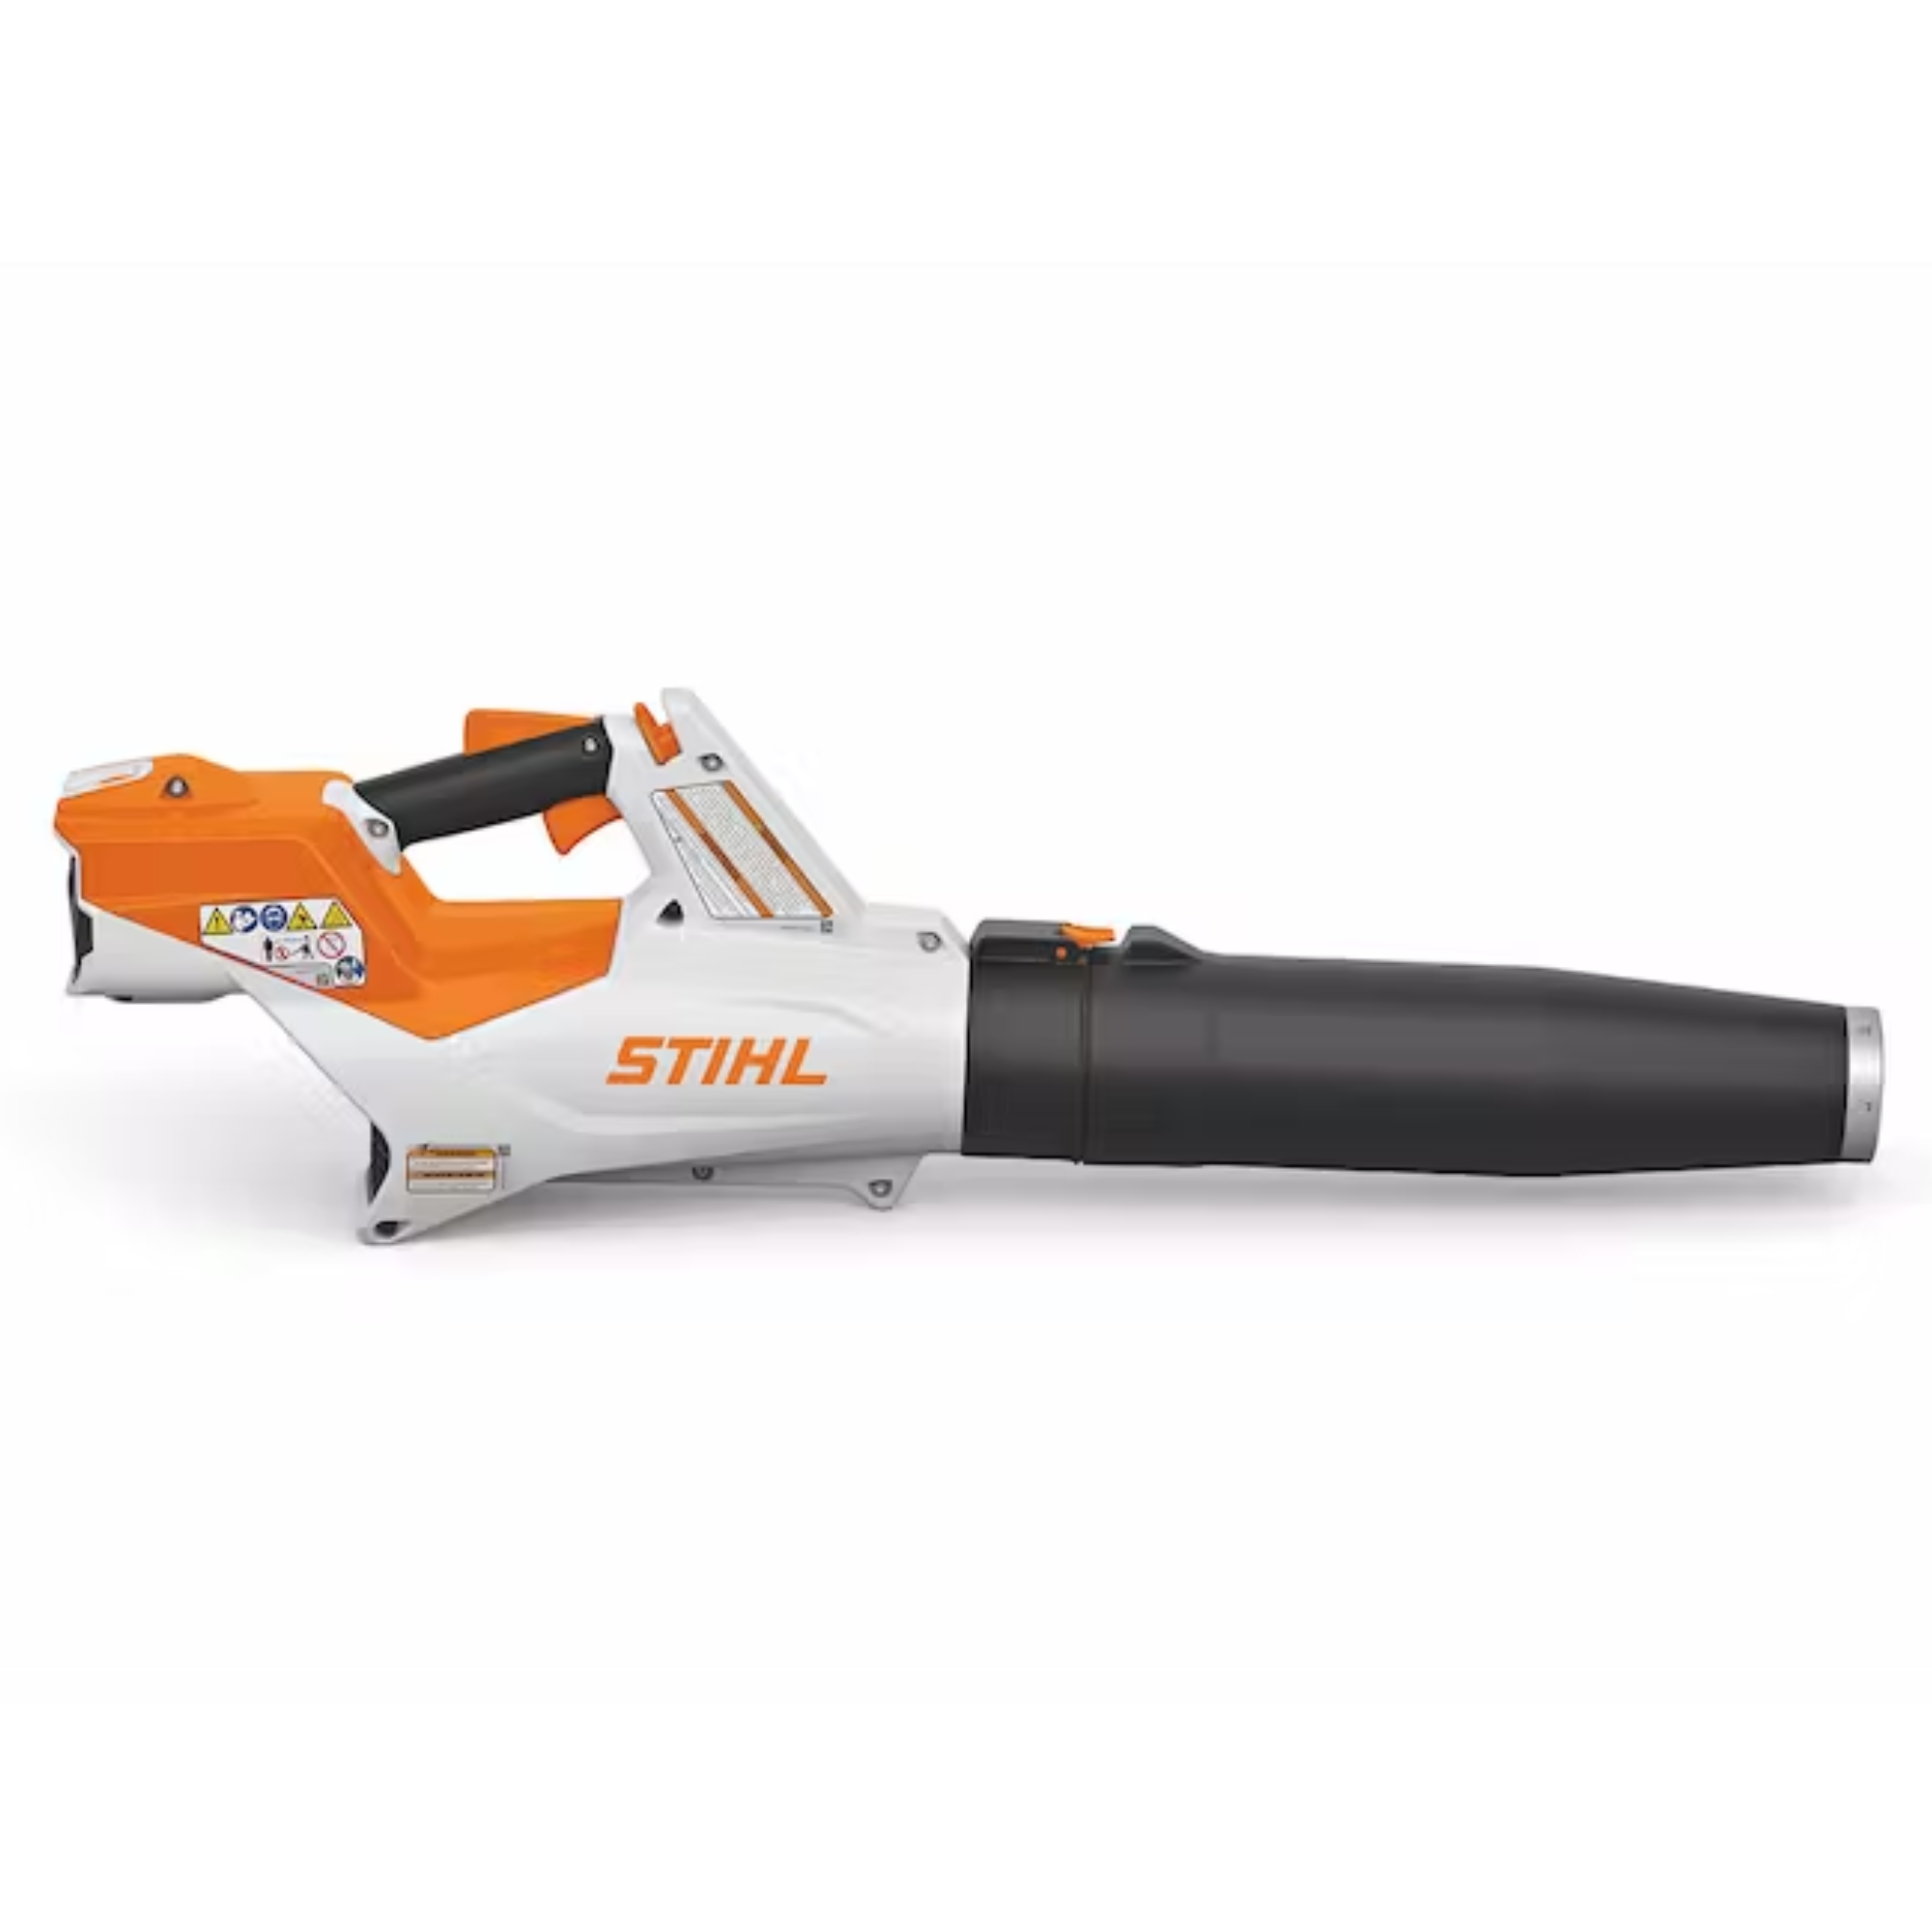 Cordless Mini Blower,2-in-1 Small Blower with 2 Lithium Battery